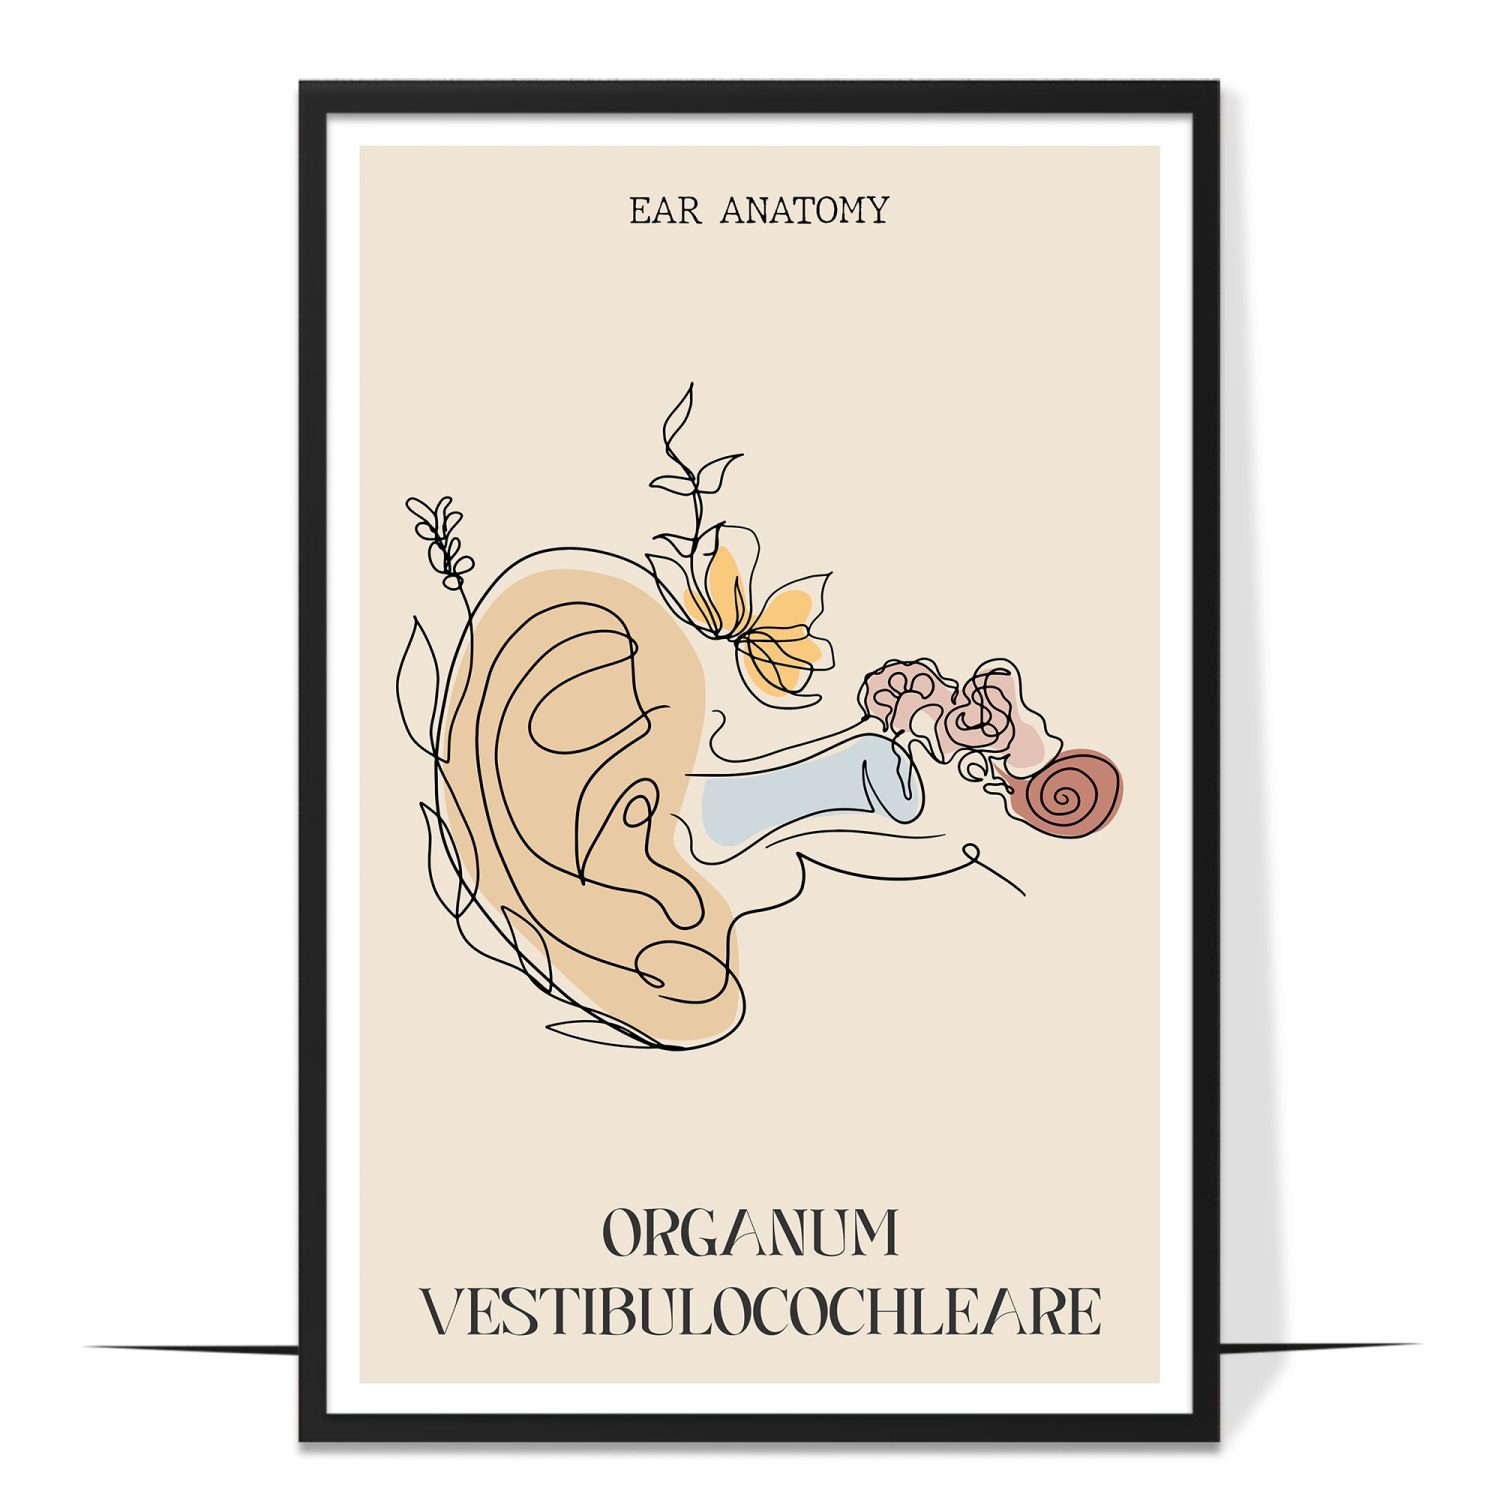 Abstract Ear Anatomy Poster